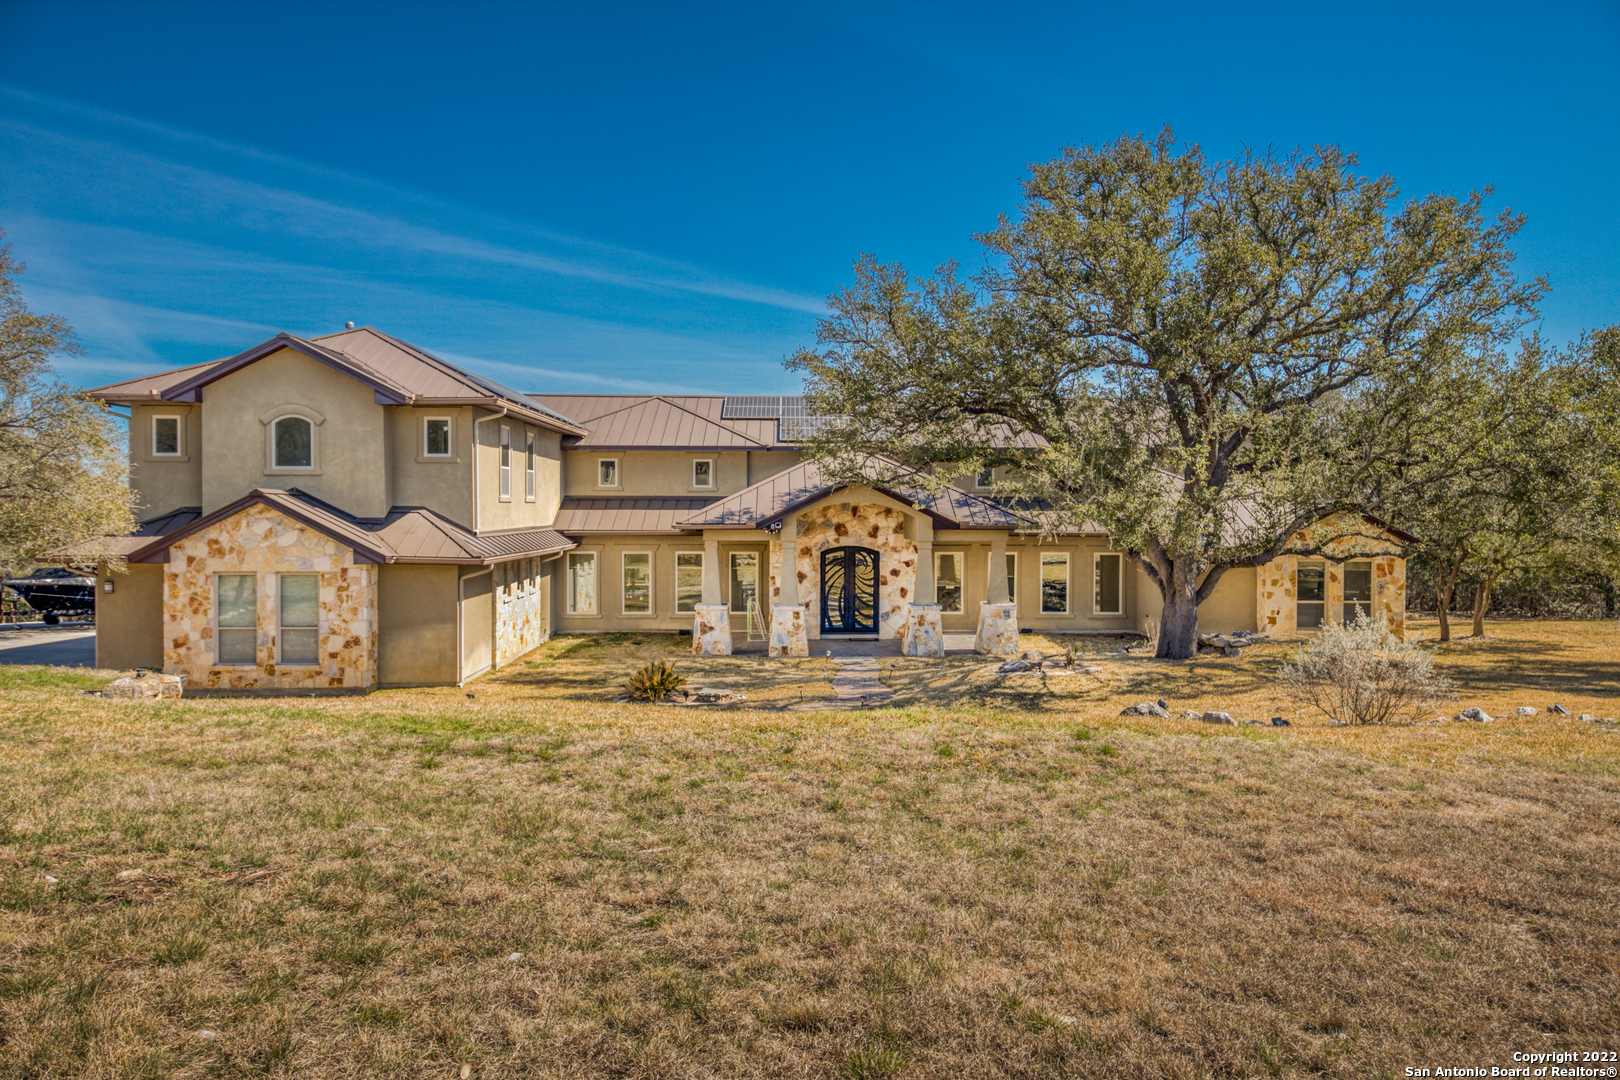 *PRICE IMPROVEMENT!*   Come view this Beautiful, contemporary, well kept home in the heart of the hill country. This unique home sits on 13 Acres, 6 bedrooms, 5 baths, open floor plan with high ceilings, beautiful kitchen, grant counter tops and built in fridge. Primary bedroom does have an upstairs office with  Custom Built in shelving, private gym and huge primary bath. This home has a zip line installed from the park, to the gorgeous pool, outdoor patio area is your private oasis ready for family gatherings and memories.   This home is equipped with solar panels, a irrigation system, 4 well water tanks, 2 year old septic, one year old A/C and Water heater.